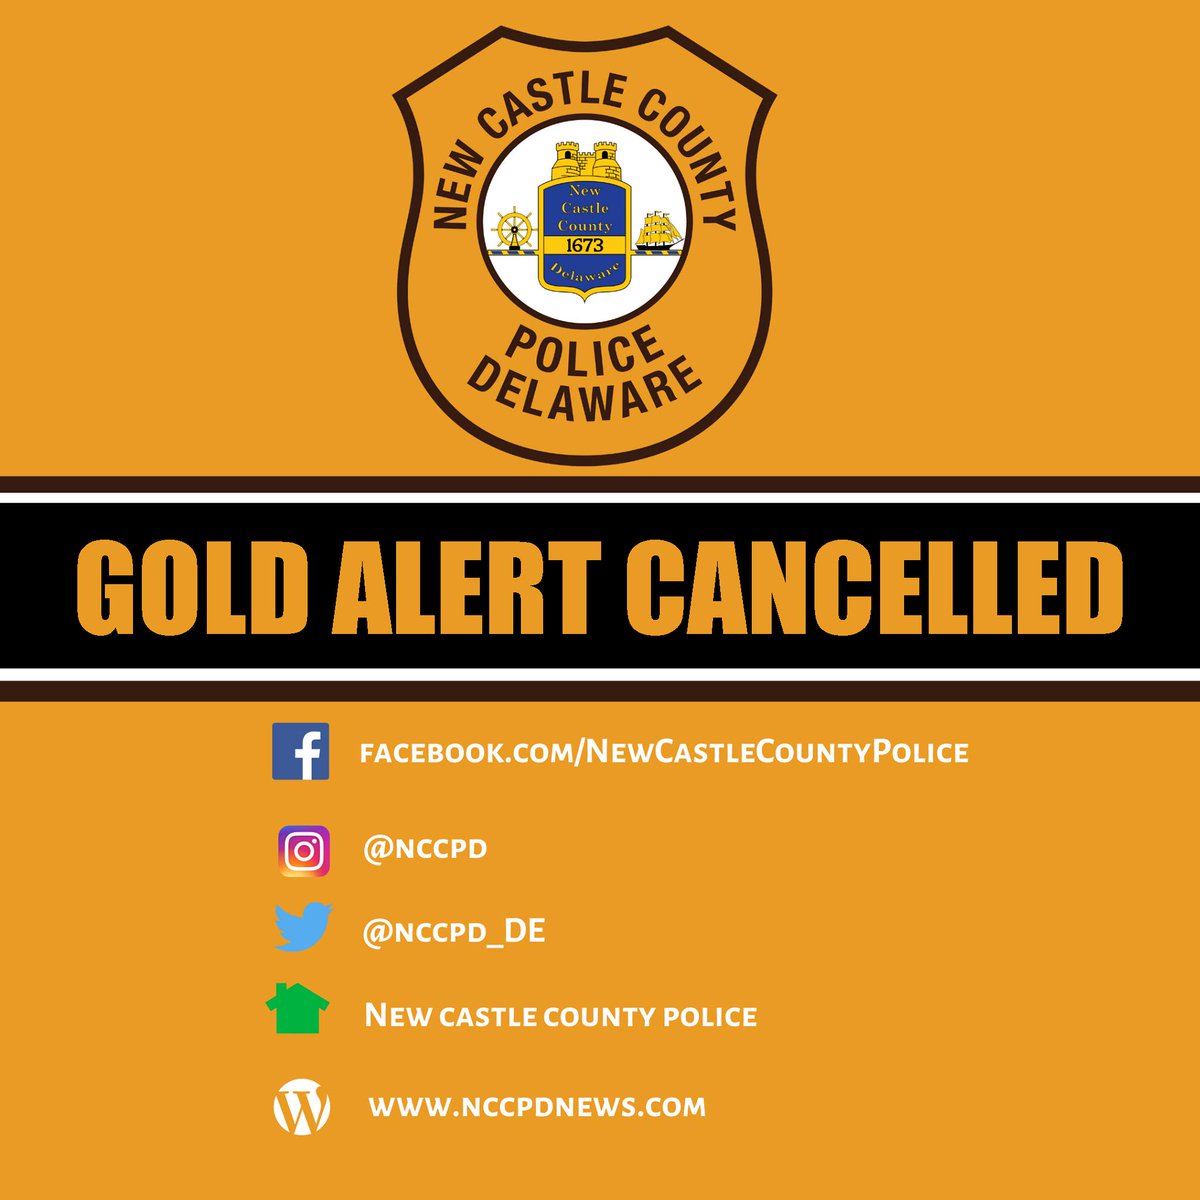 Gold Alert Cancelled for Missing Wilmington Man

Michael Morales has been located and the Gold Alert has been cancelled.

###